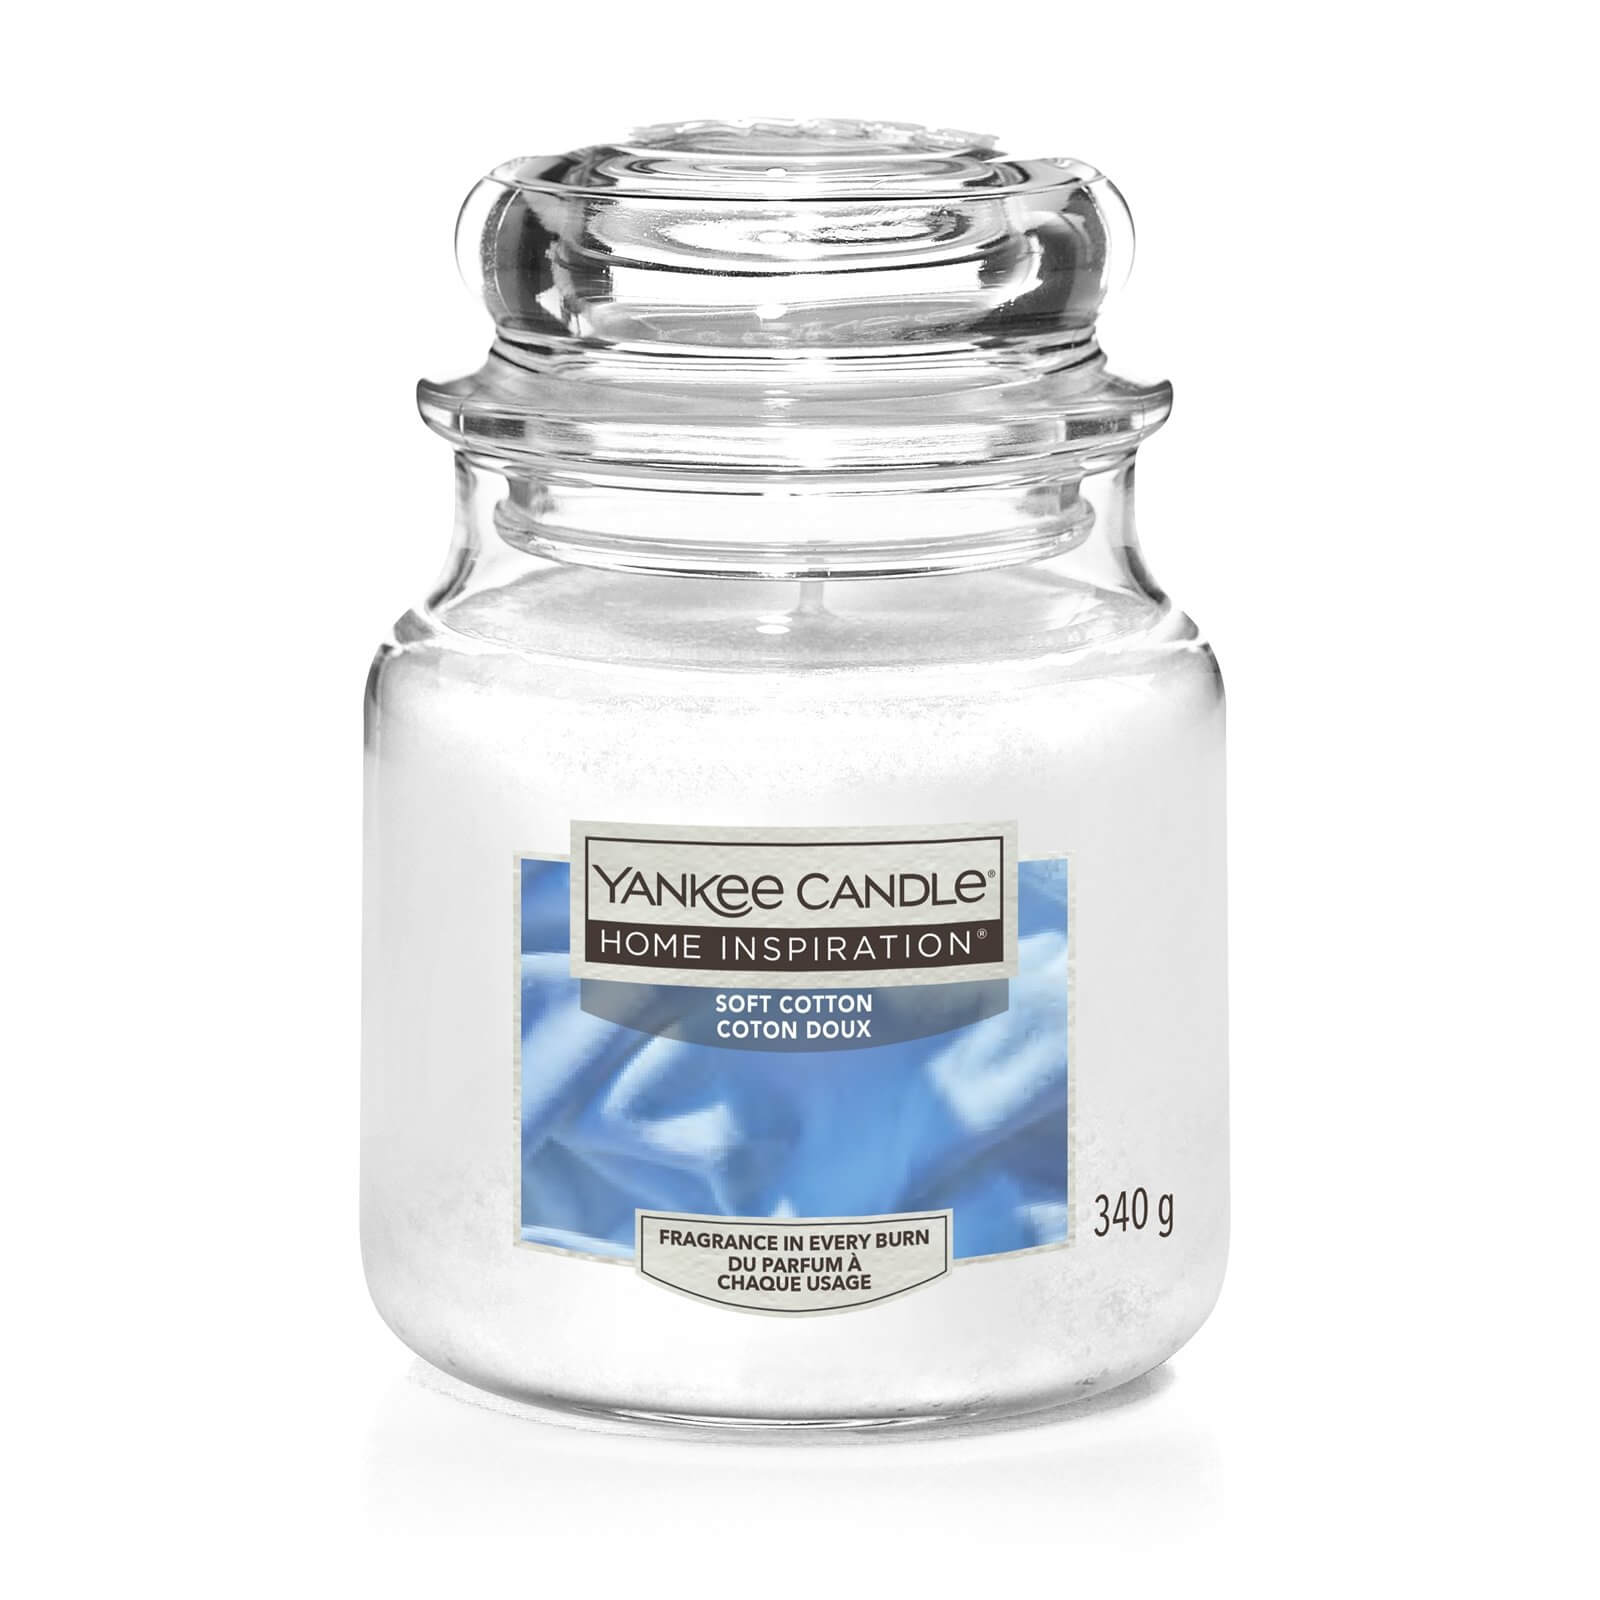 Yankee Candle Home Inspiration Scented Candle - Medium Jar - Soft Cotton